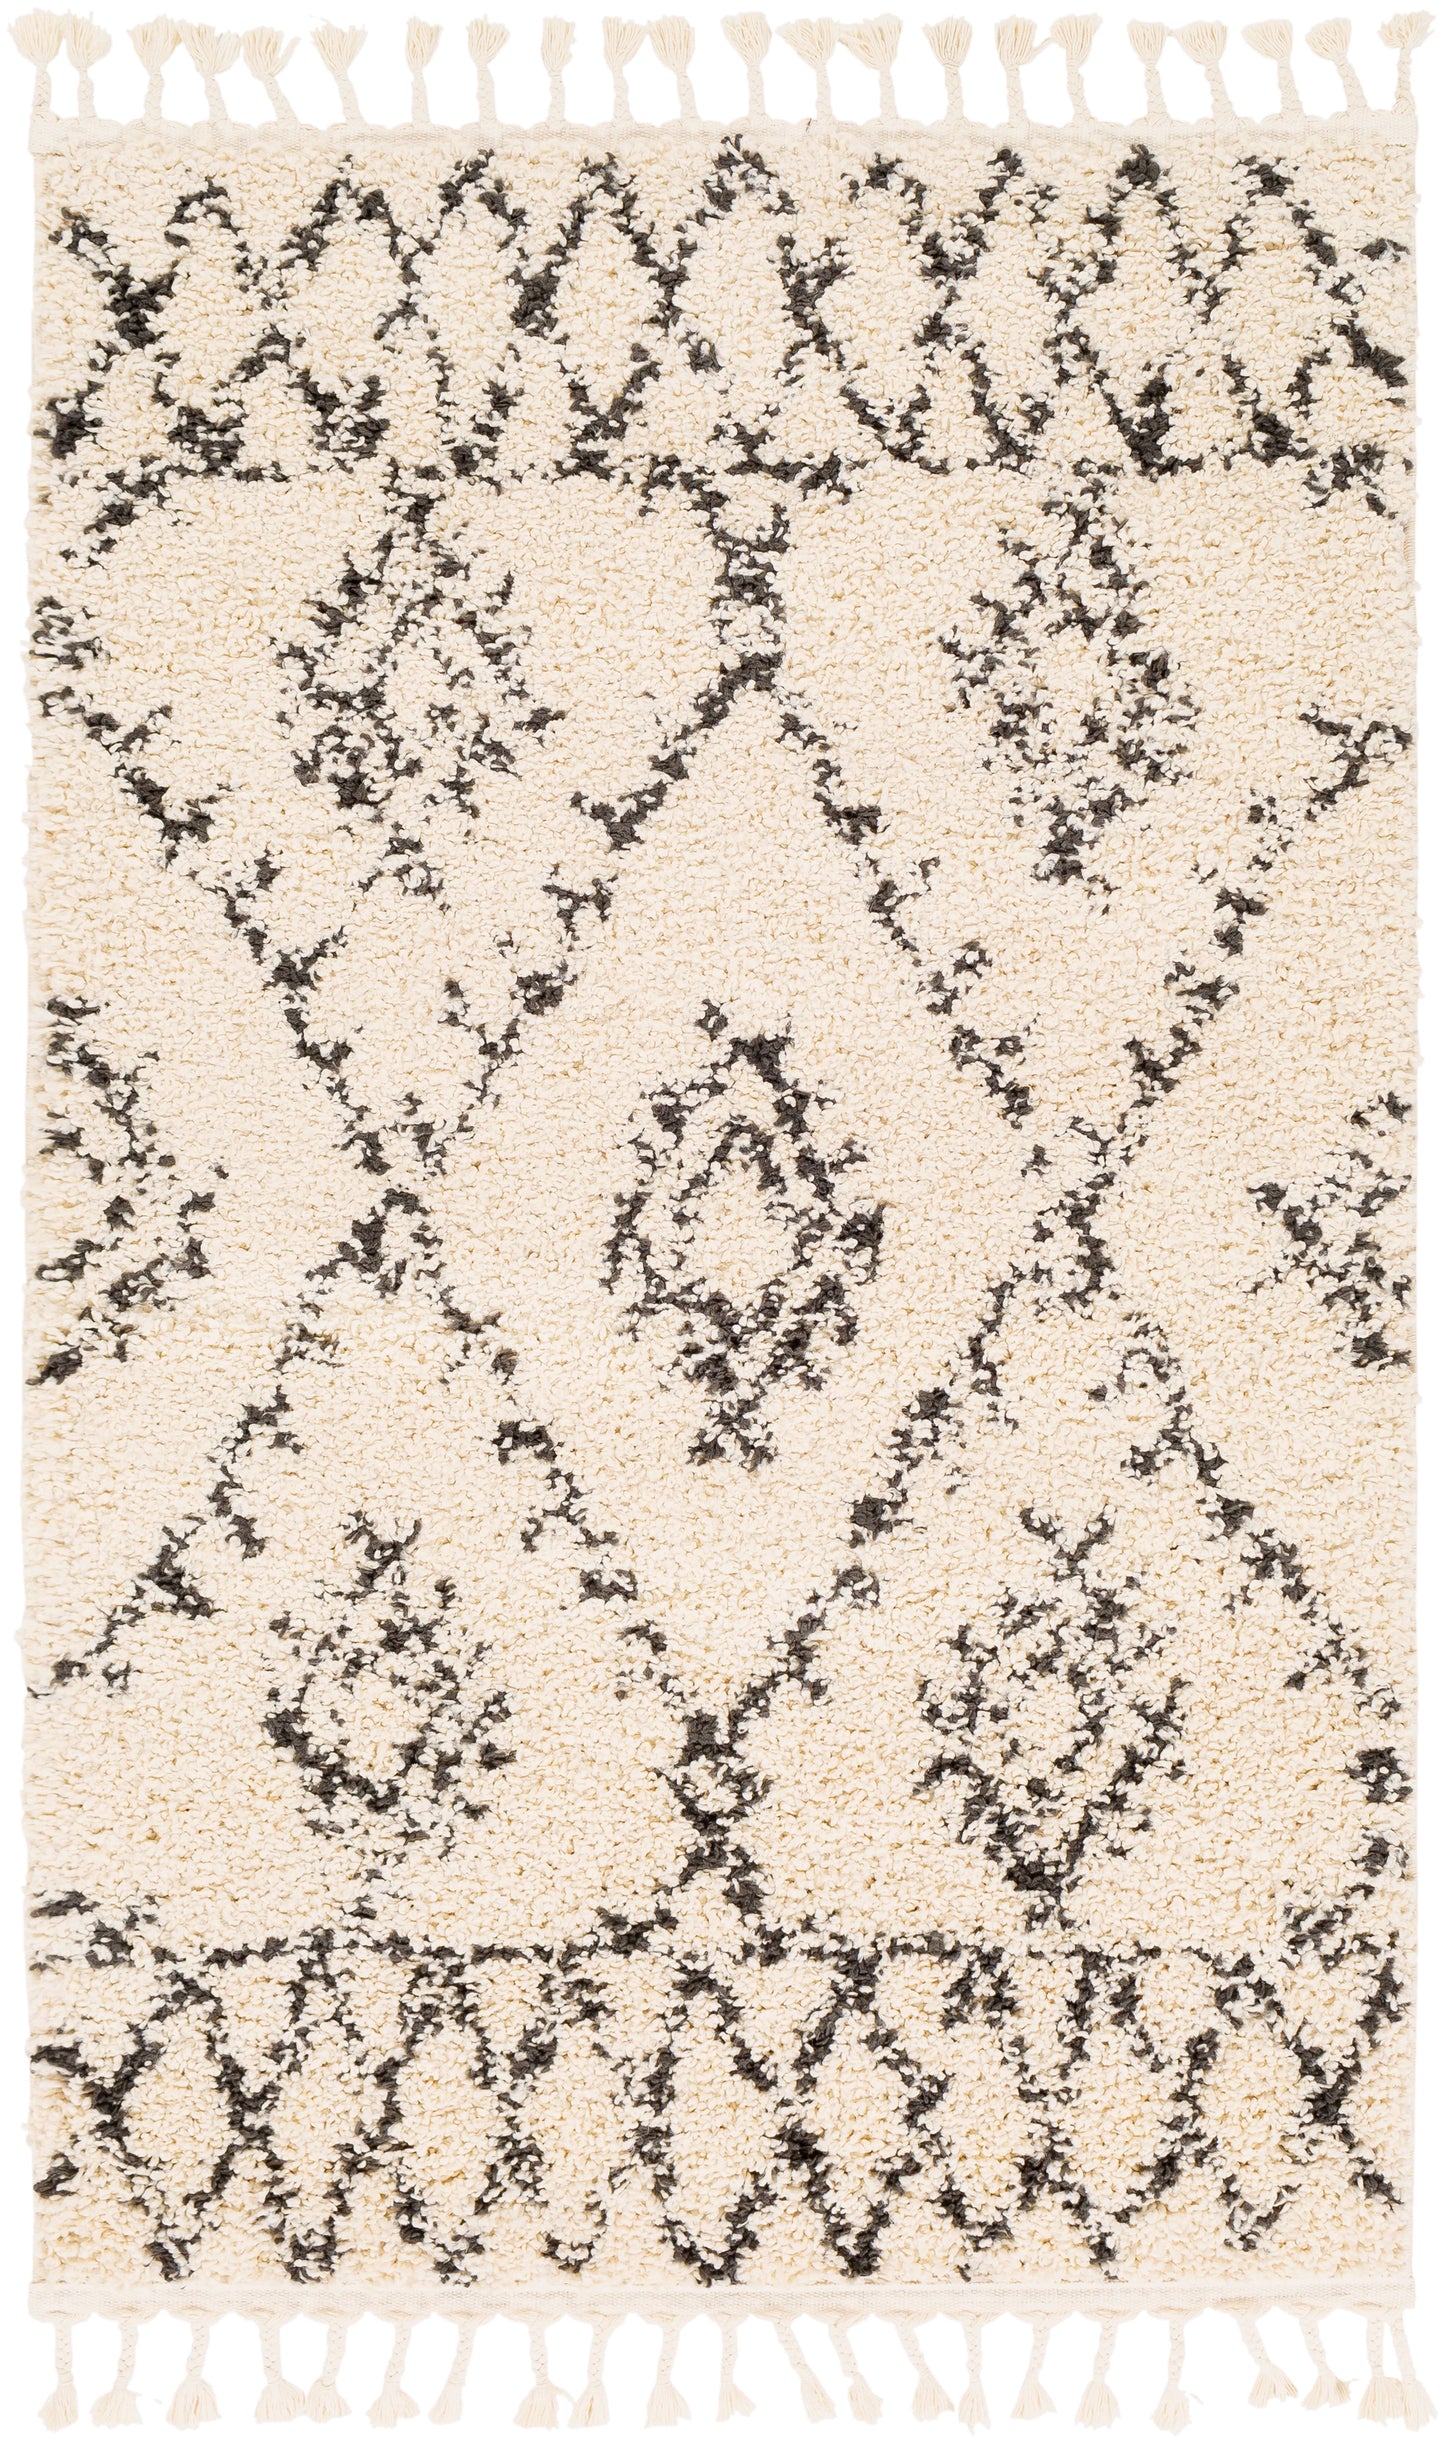 Berber Shag 22262 Machine Woven Synthetic Blend Indoor Area Rug by Surya Rugs